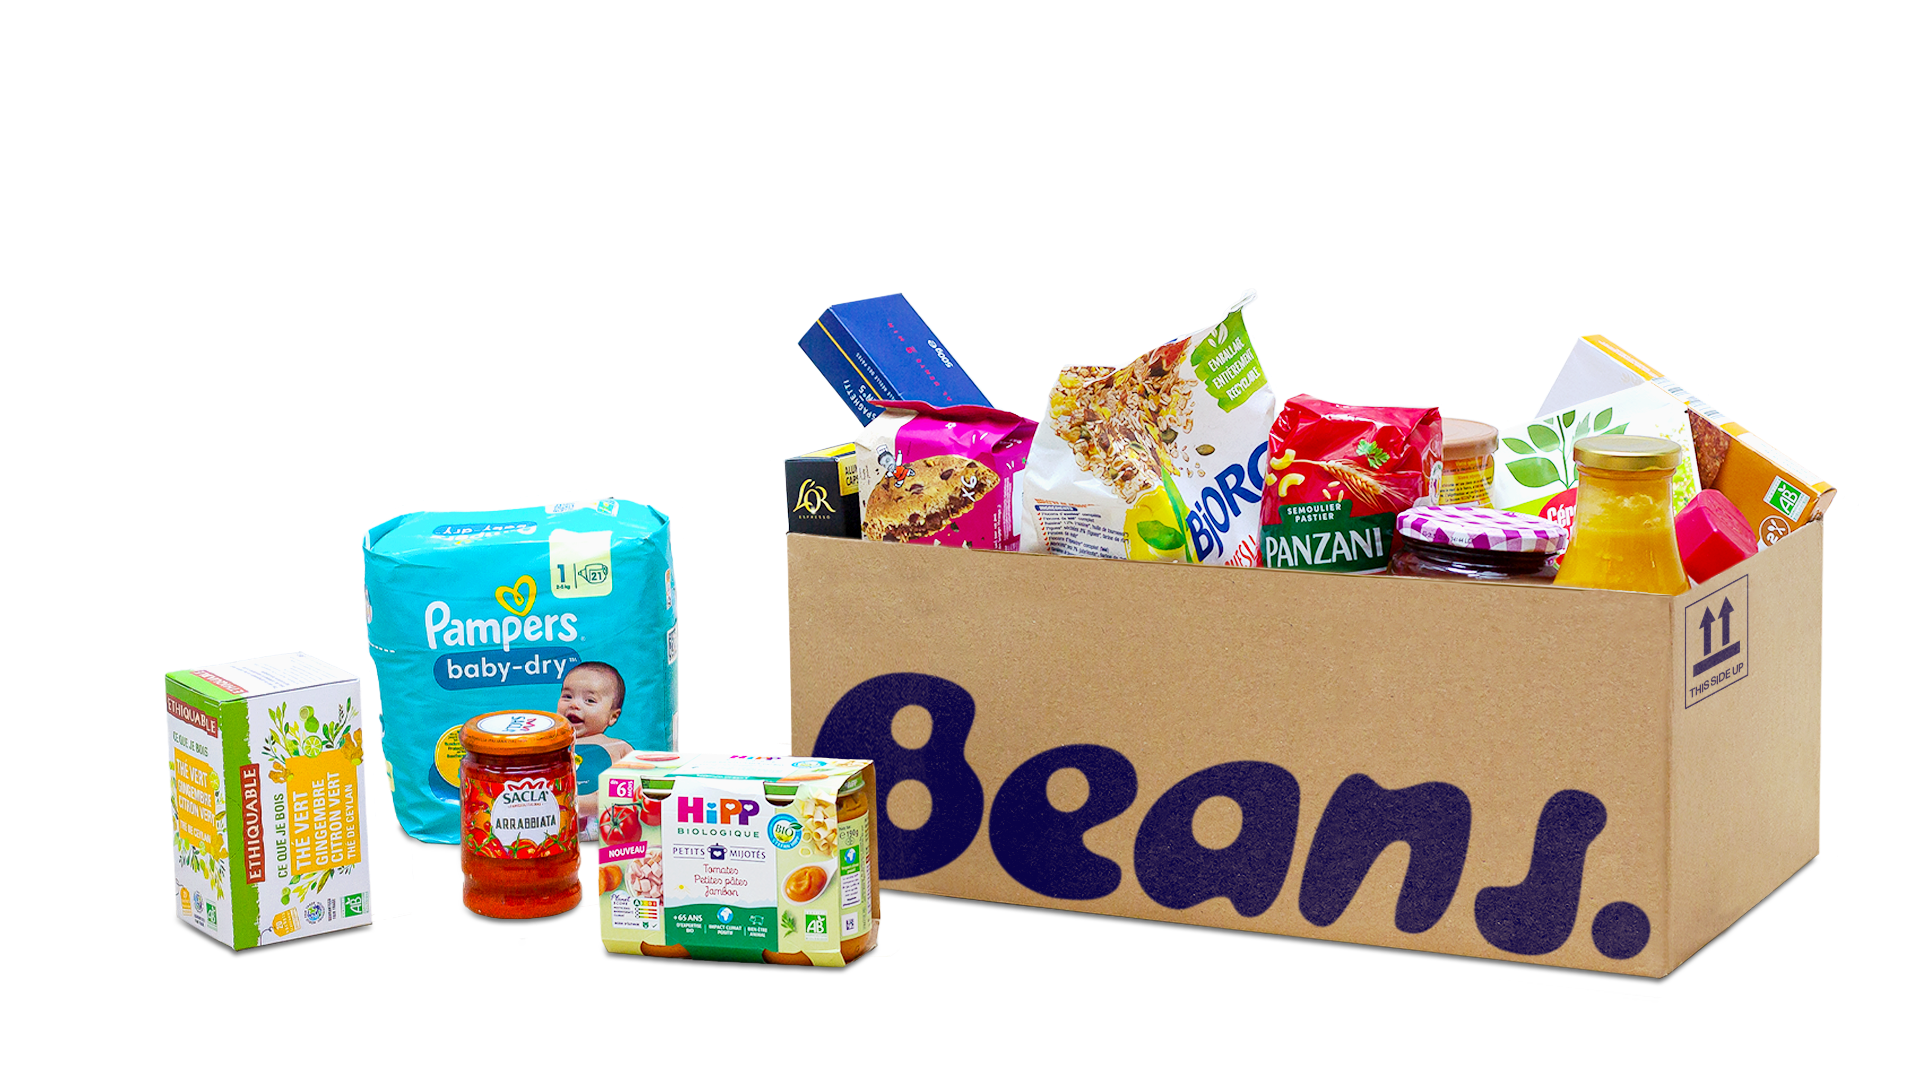 beansclub products